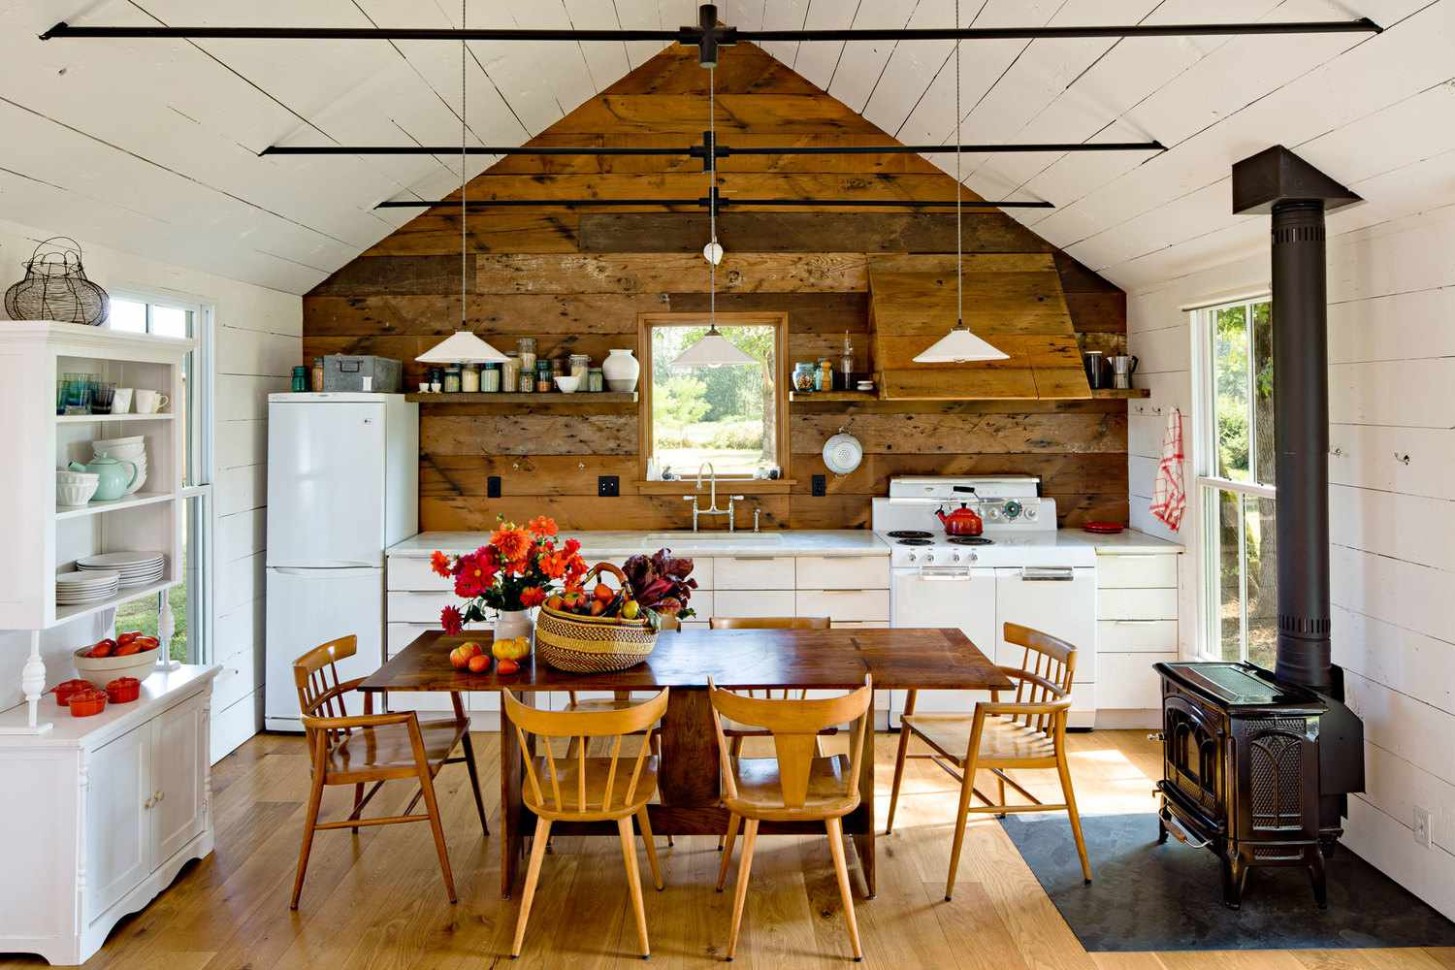 9 Modern Cottage Kitchens For Every Decorating Taste - what is a cottage kitchen?